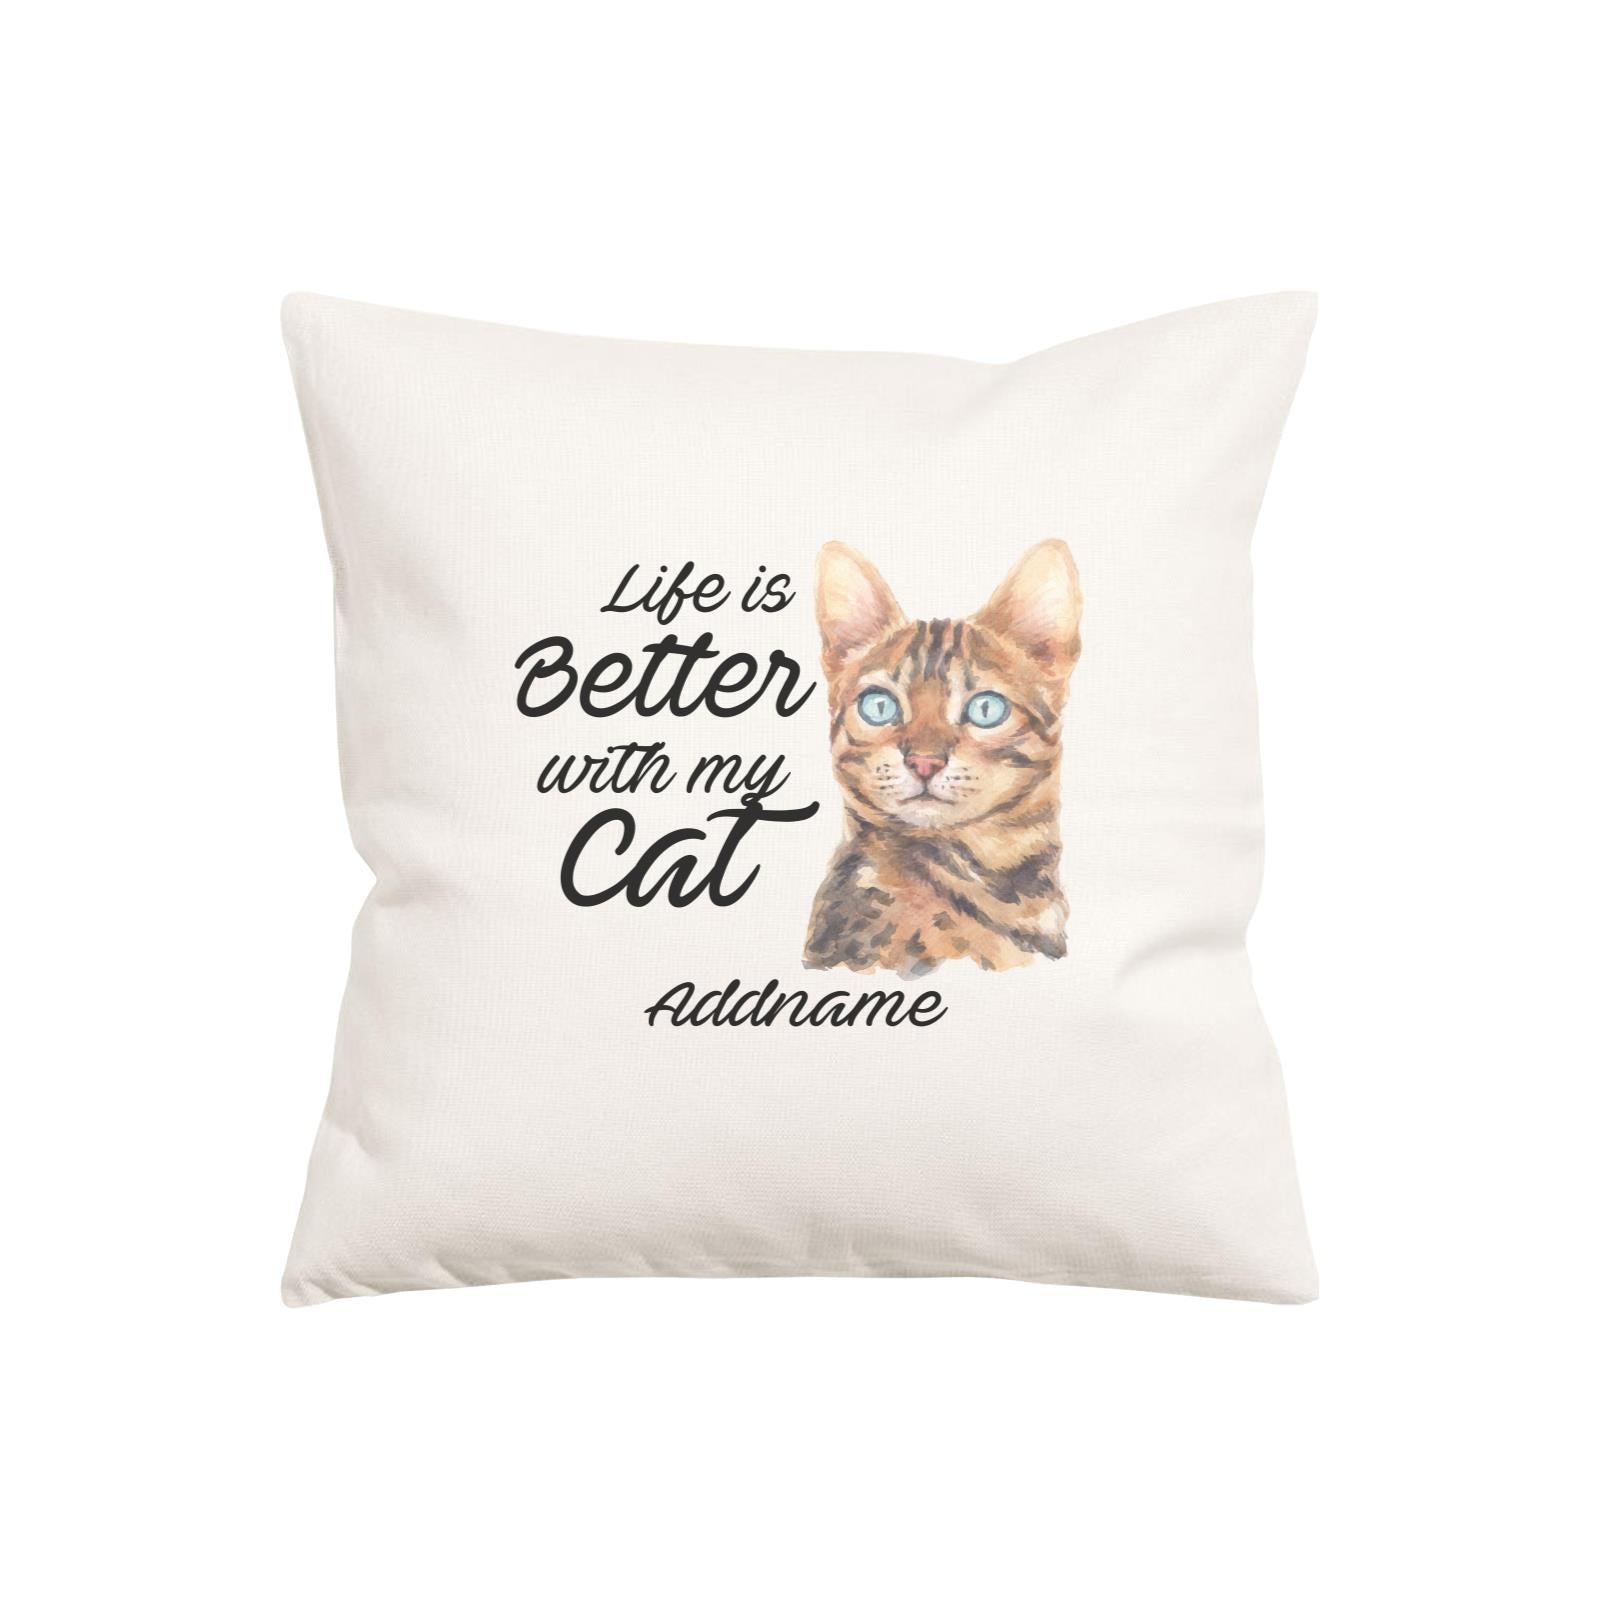 Watercolor Life is Better With My Cat Bengal Addname Pillow Cushion